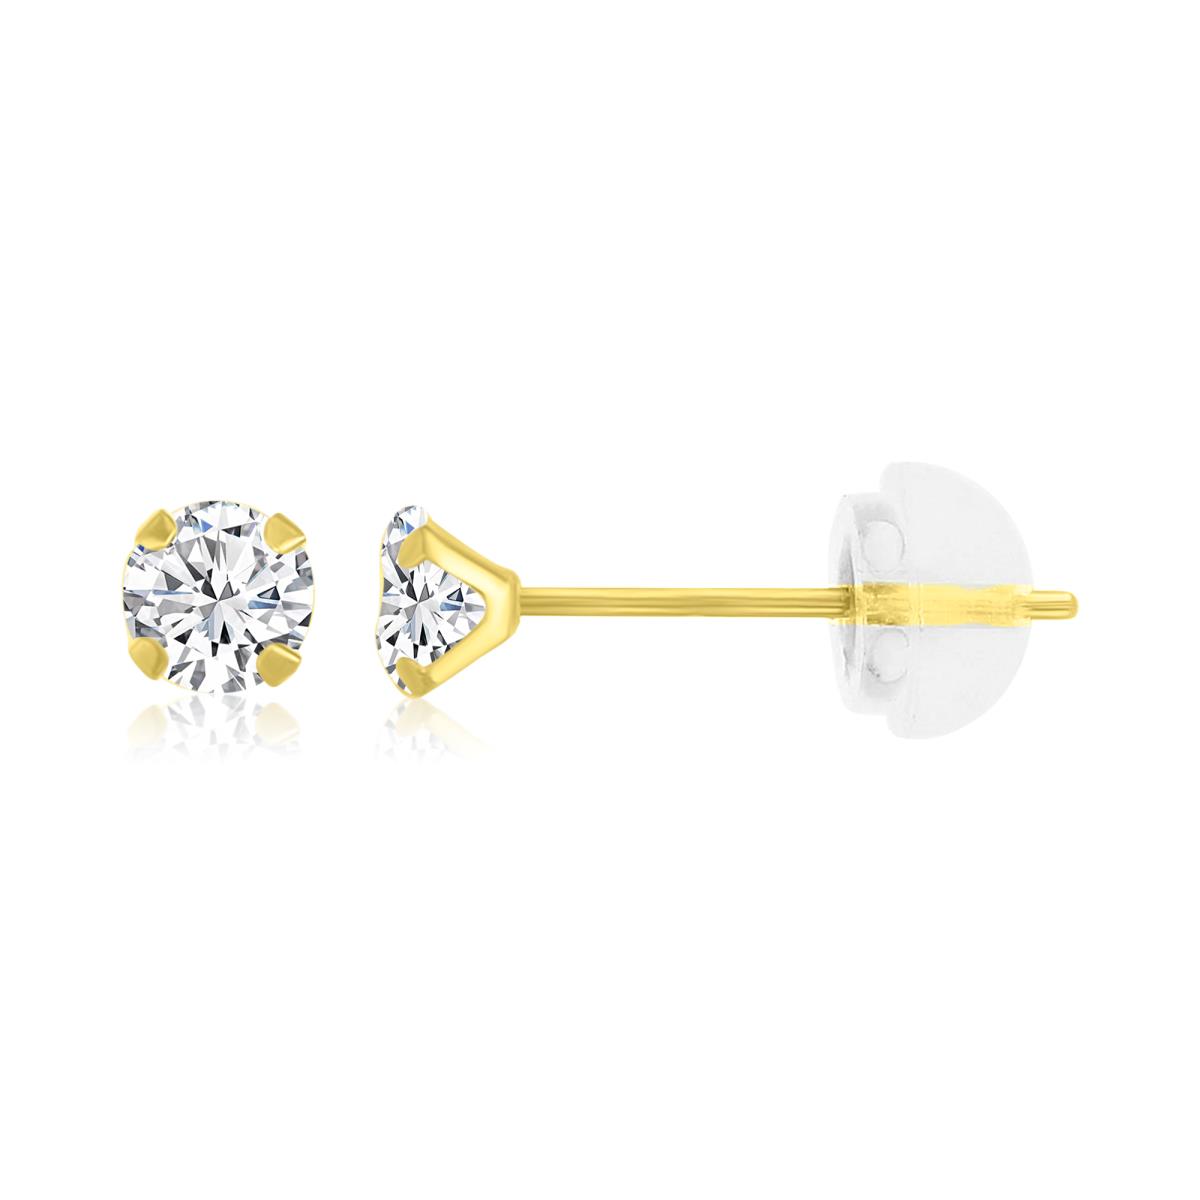 14K Yellow Gold 3mm Martini Round Cut Solitaire Stud Earring